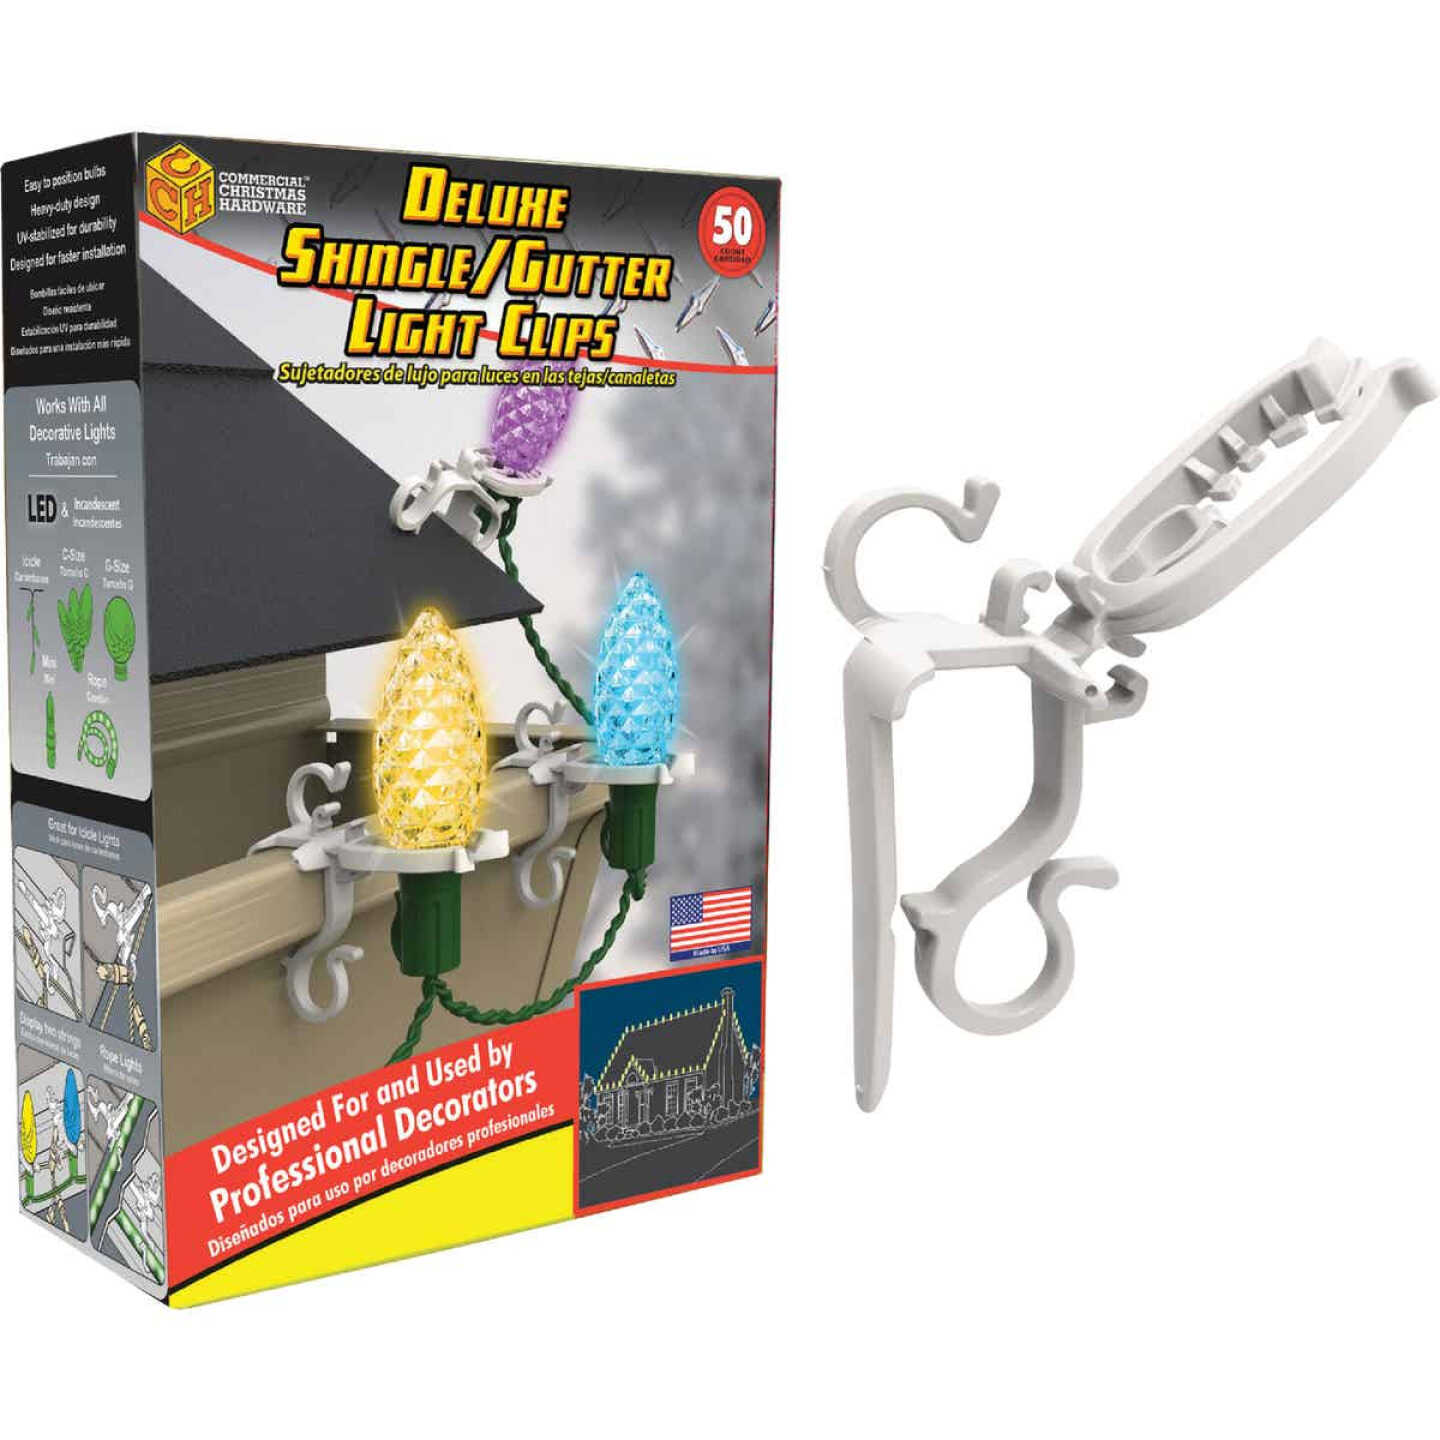 Set of 500ct Clear Gutter & Shingle Christmas Light Clips